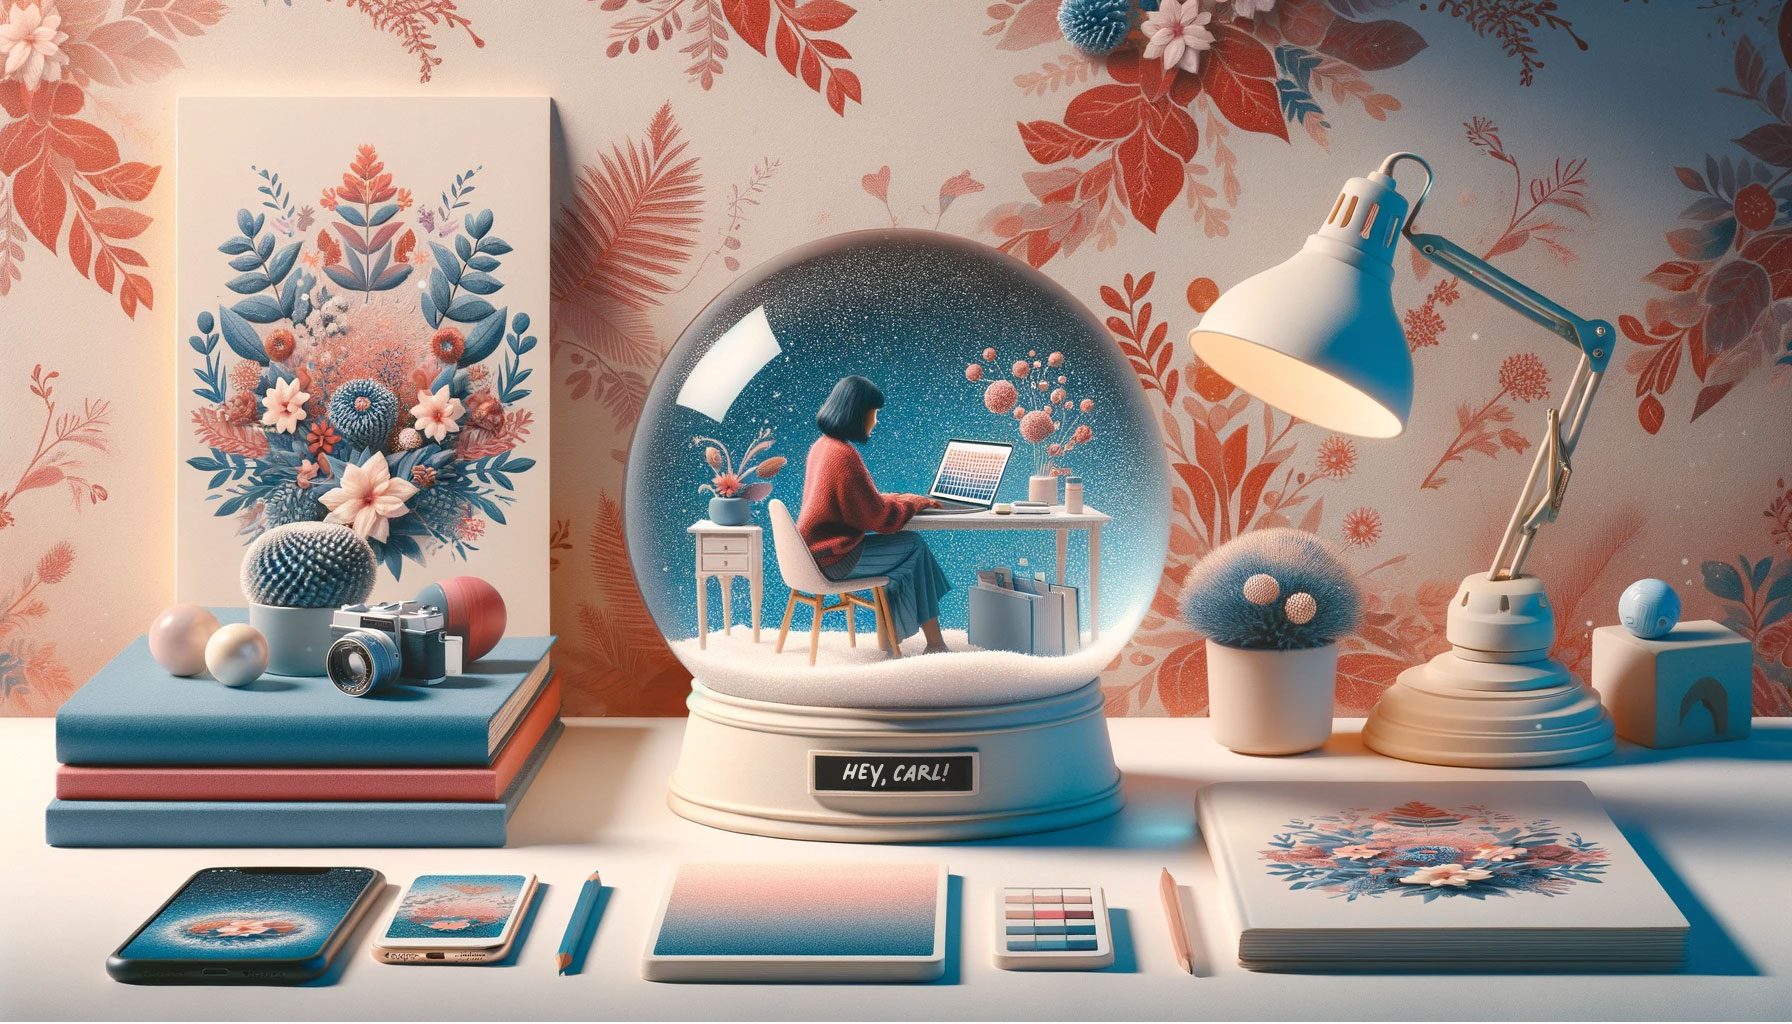 Image of a small business owner working at a desk inside a snowglobe.